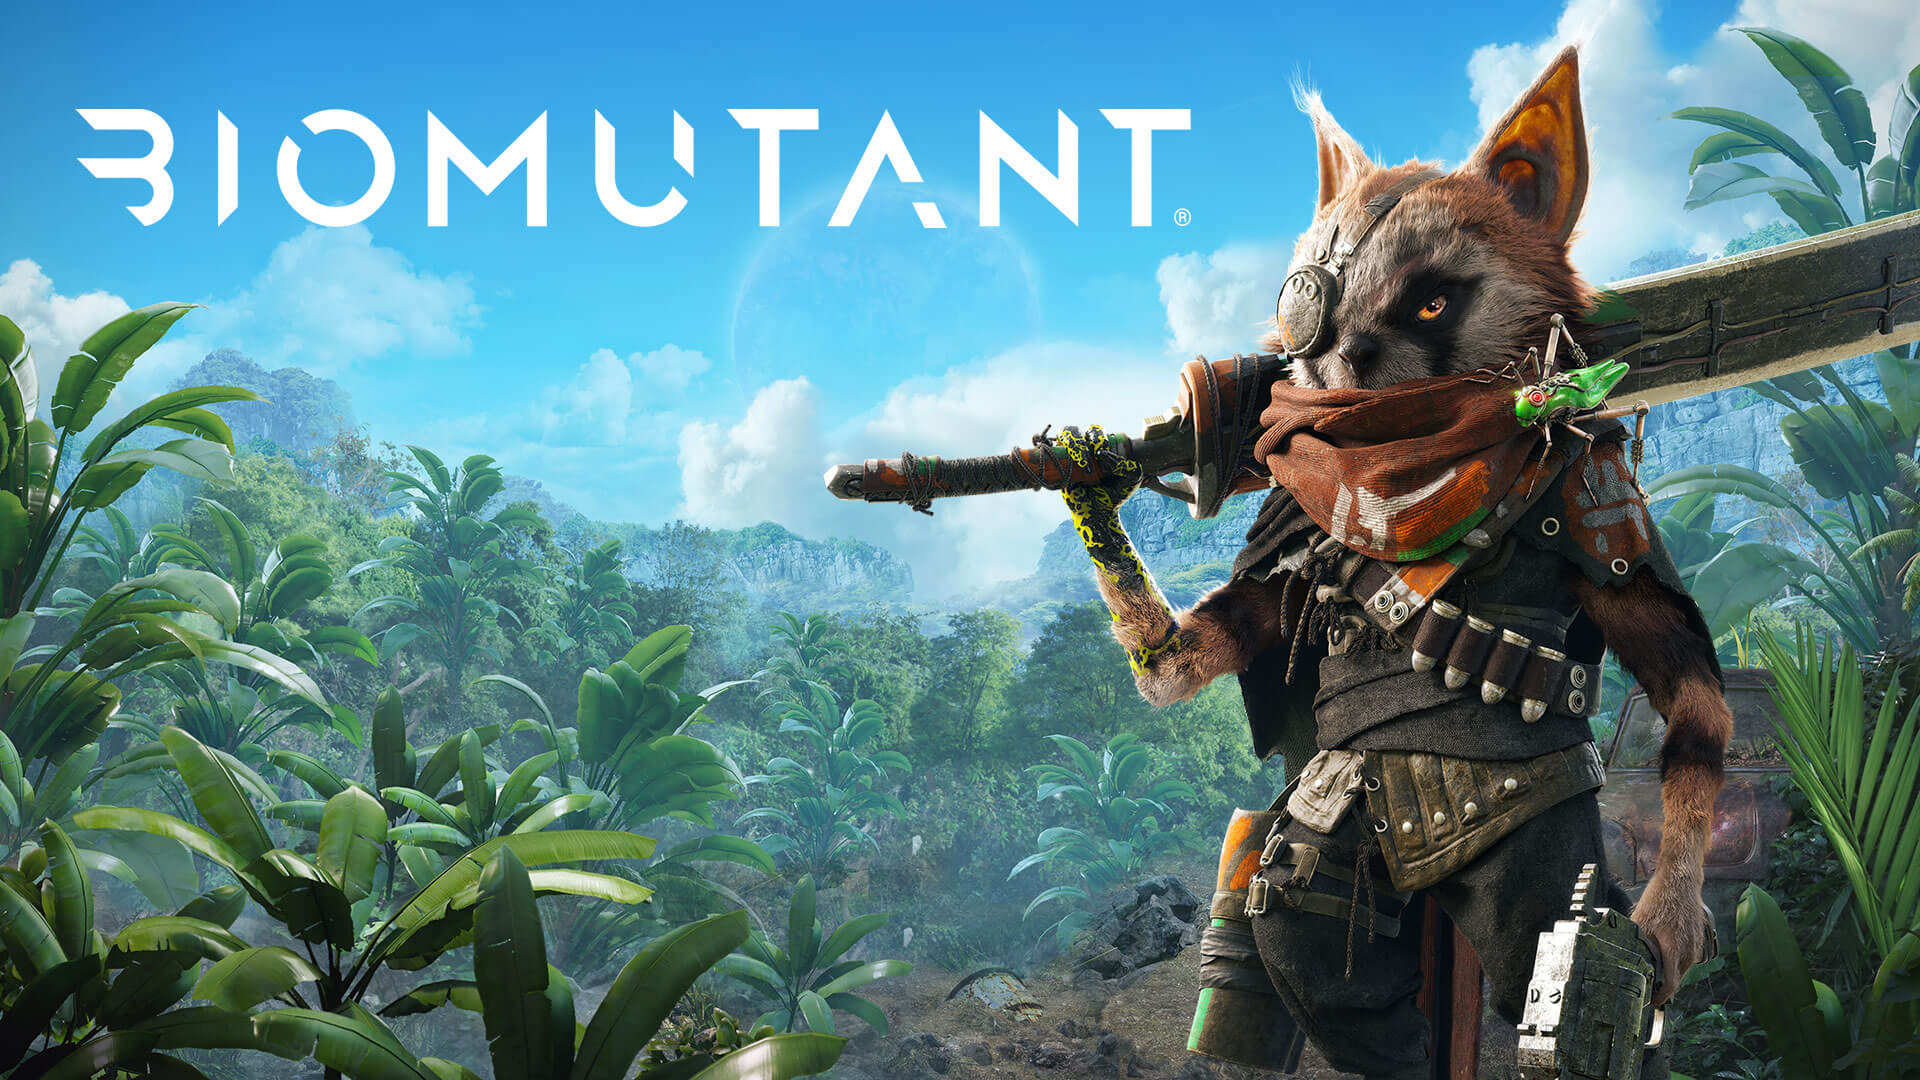 The protagonist of Biomutant stands with a sword balanced on their shoulder